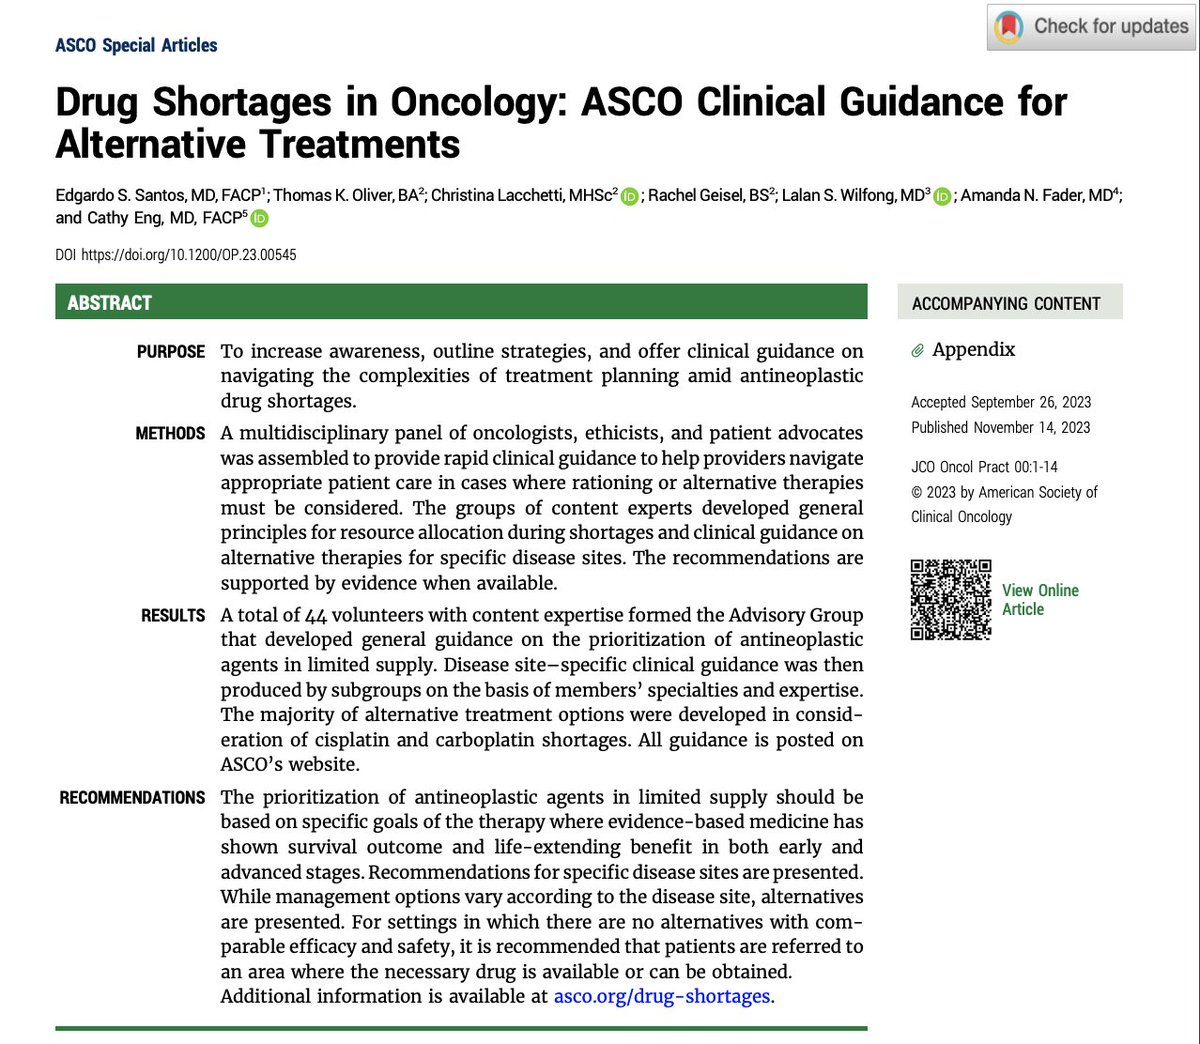 Great collaborating with @EdgardoSantosMD, @CathyEngMD, @amandanfader, Tom Oliver, Christina Lacchetti & Lalan Wilfong to produce guidance on treating pts during antineoplastic drug shortages for @JCOOP_ASCO. 15 chemo drugs currently in shortage. ascopubs.org/doi/full/10.12…